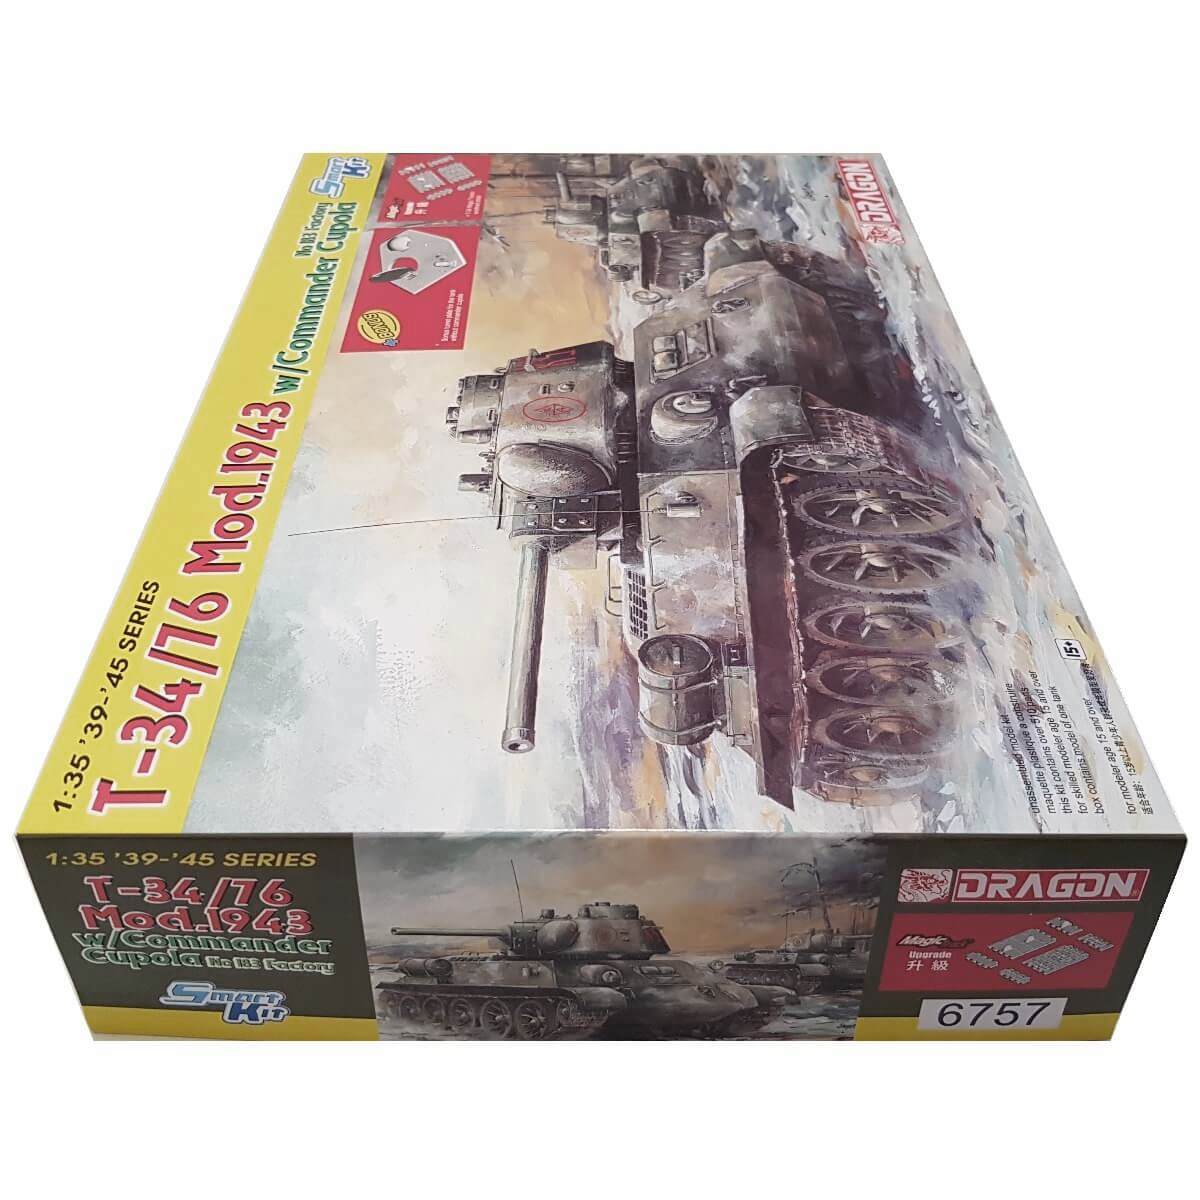 1:35 T-34/76 Mod.1943 with Commander Cupola - DRAGON